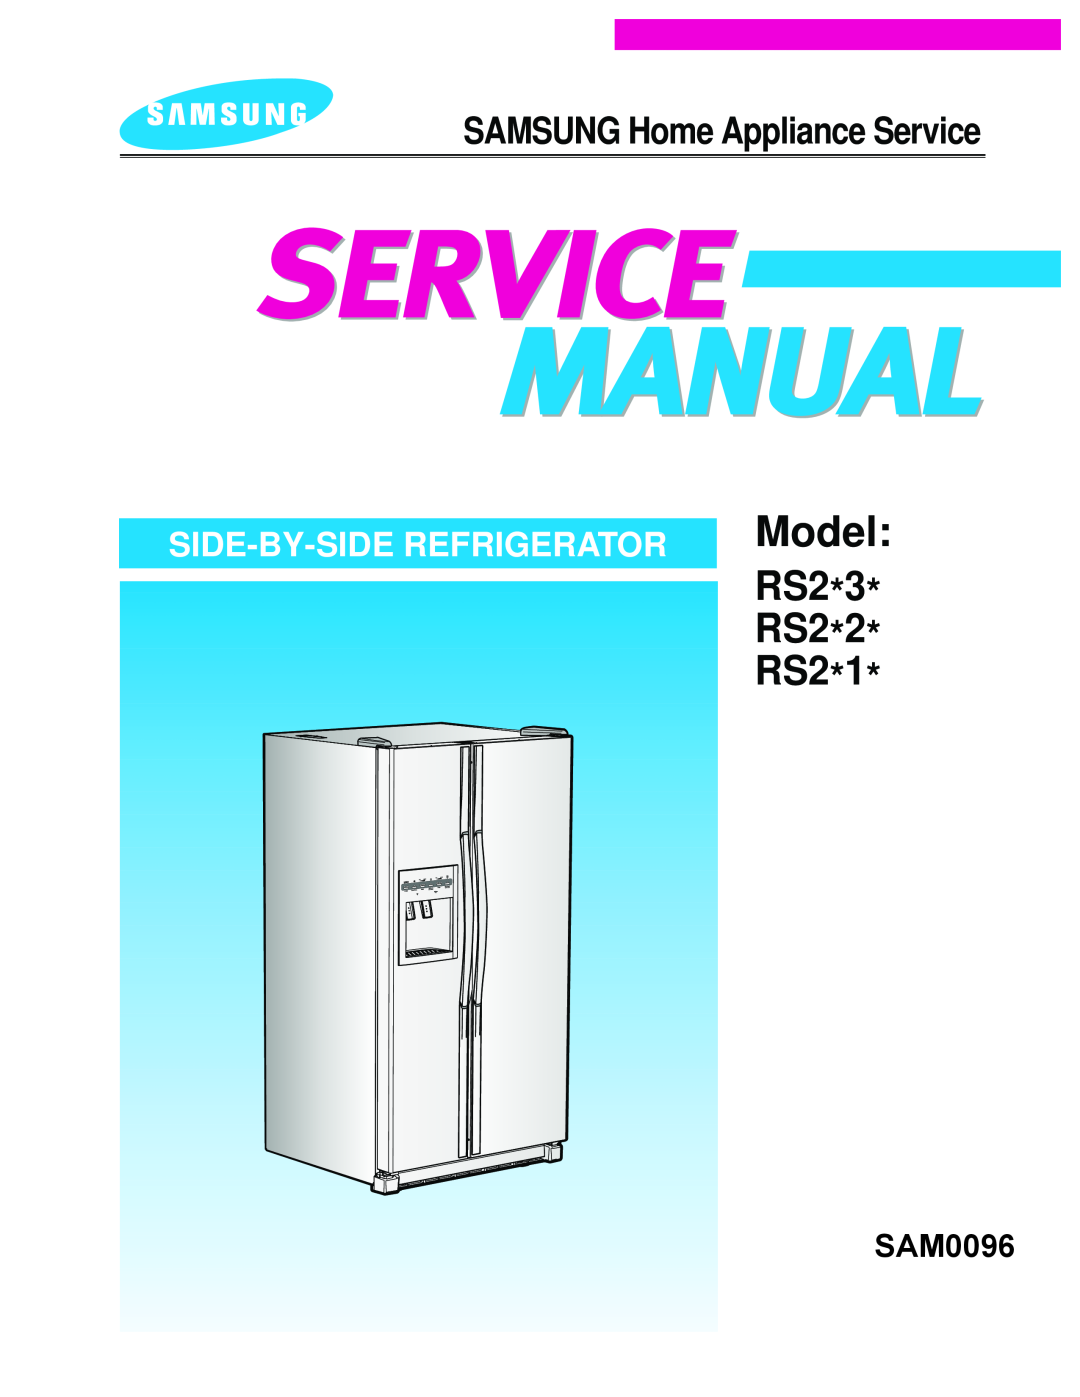 Samsung manual Model, RS2*3* RS2*2* RS2*1, SAMSUNG Home Appliance Service, Side-By-Siderefrigerator, SAM0096 